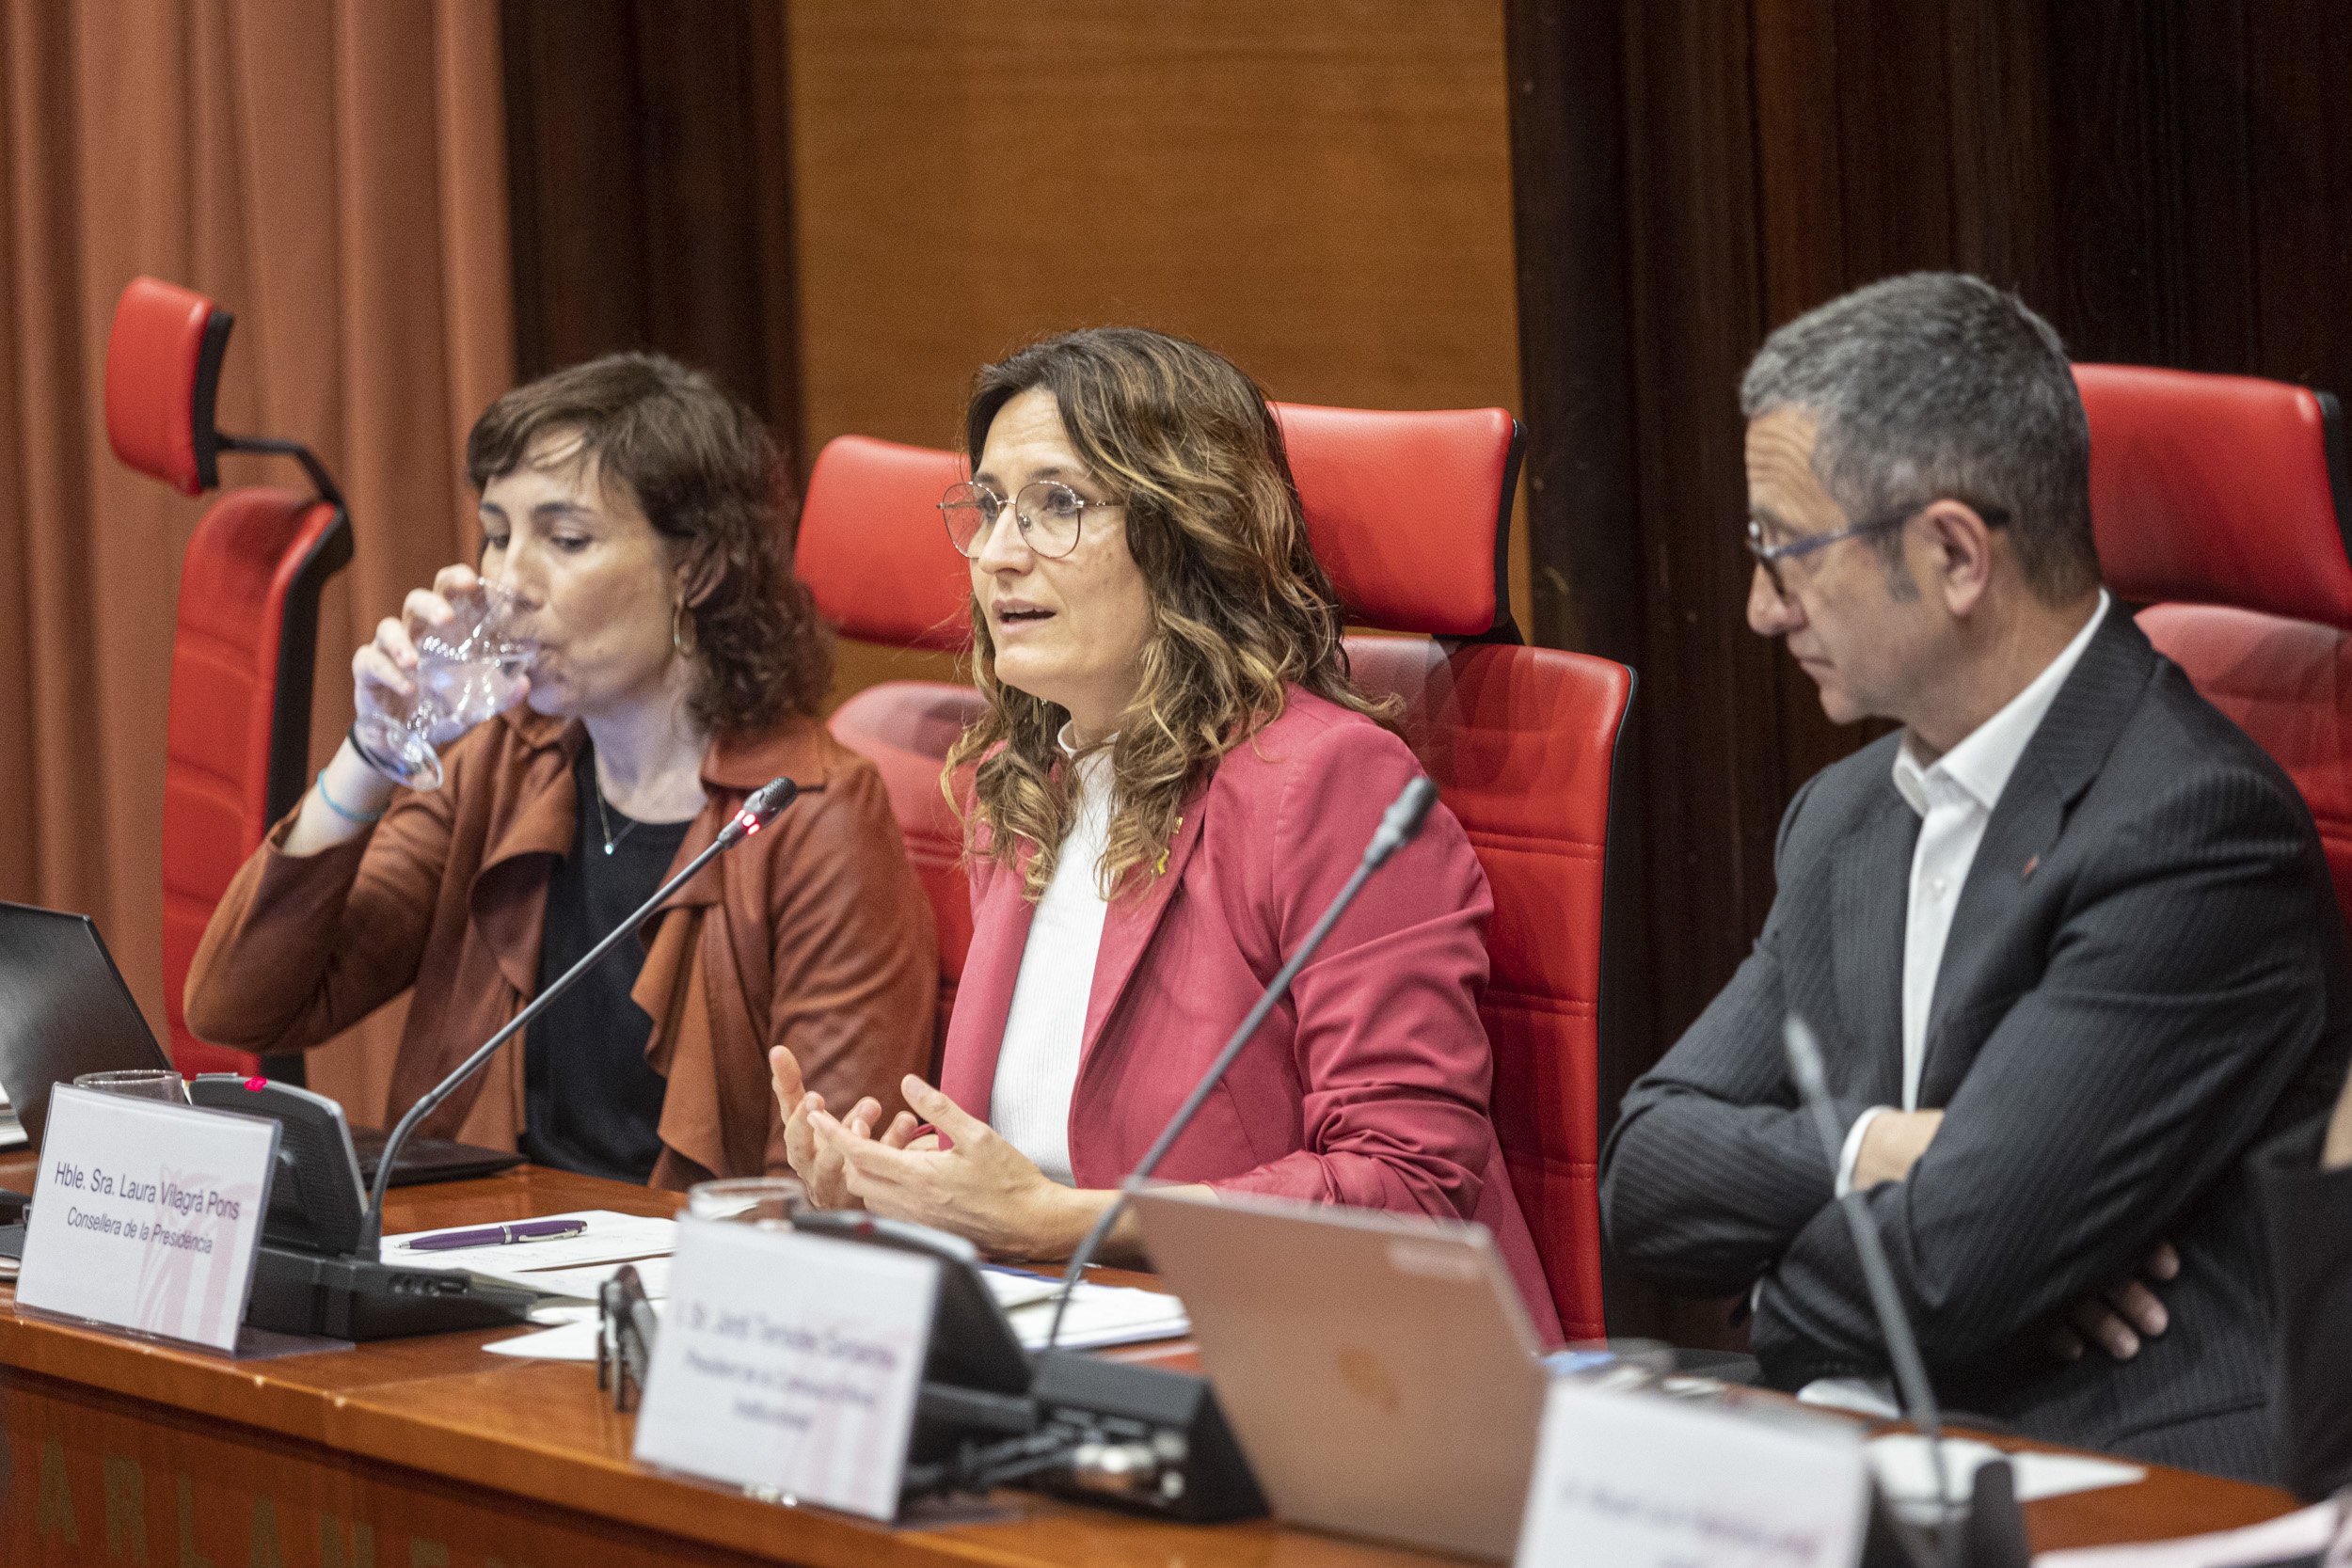 Vilagrà, under pressure in Catalan Parliament over exam chaos: "I'm not one to walk away"